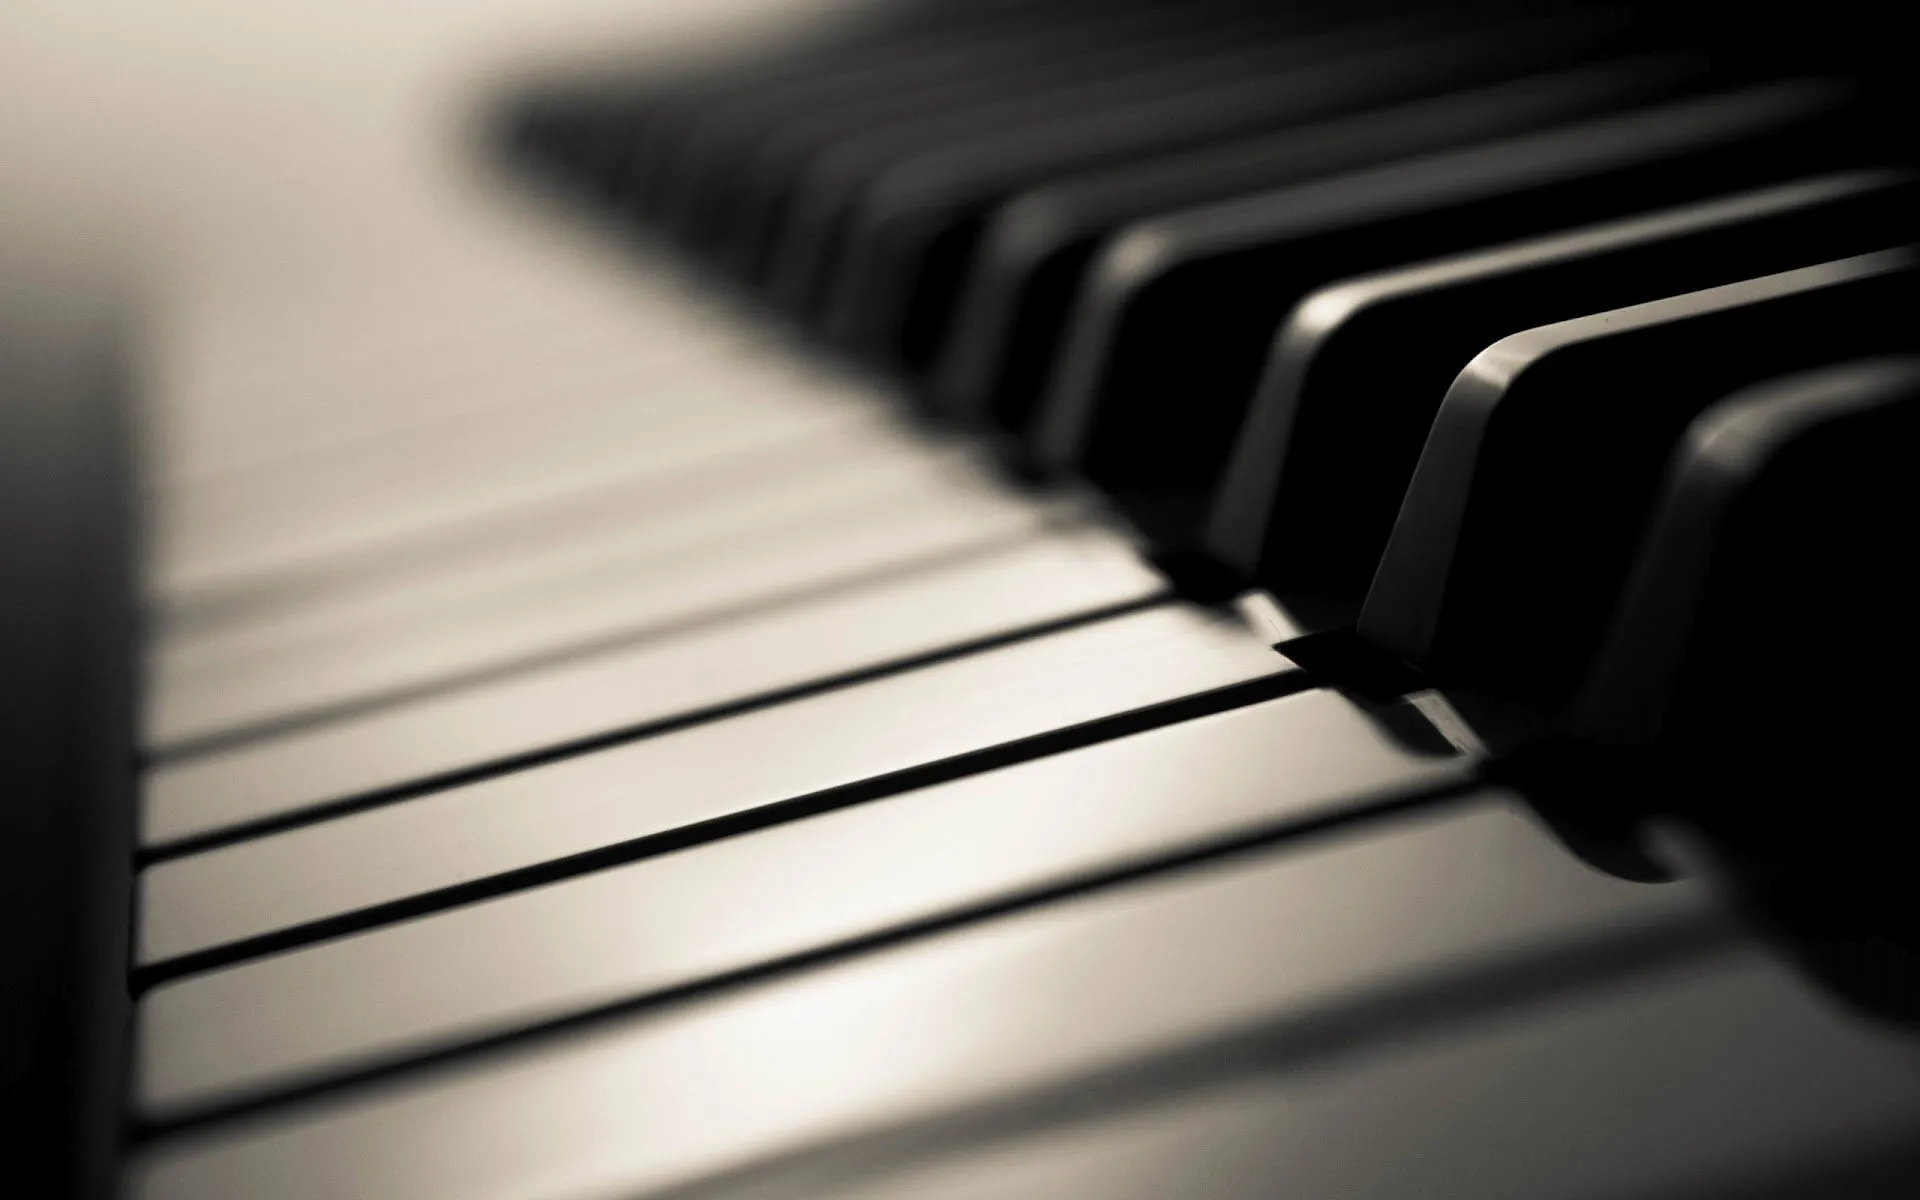 Piano keys in black and white